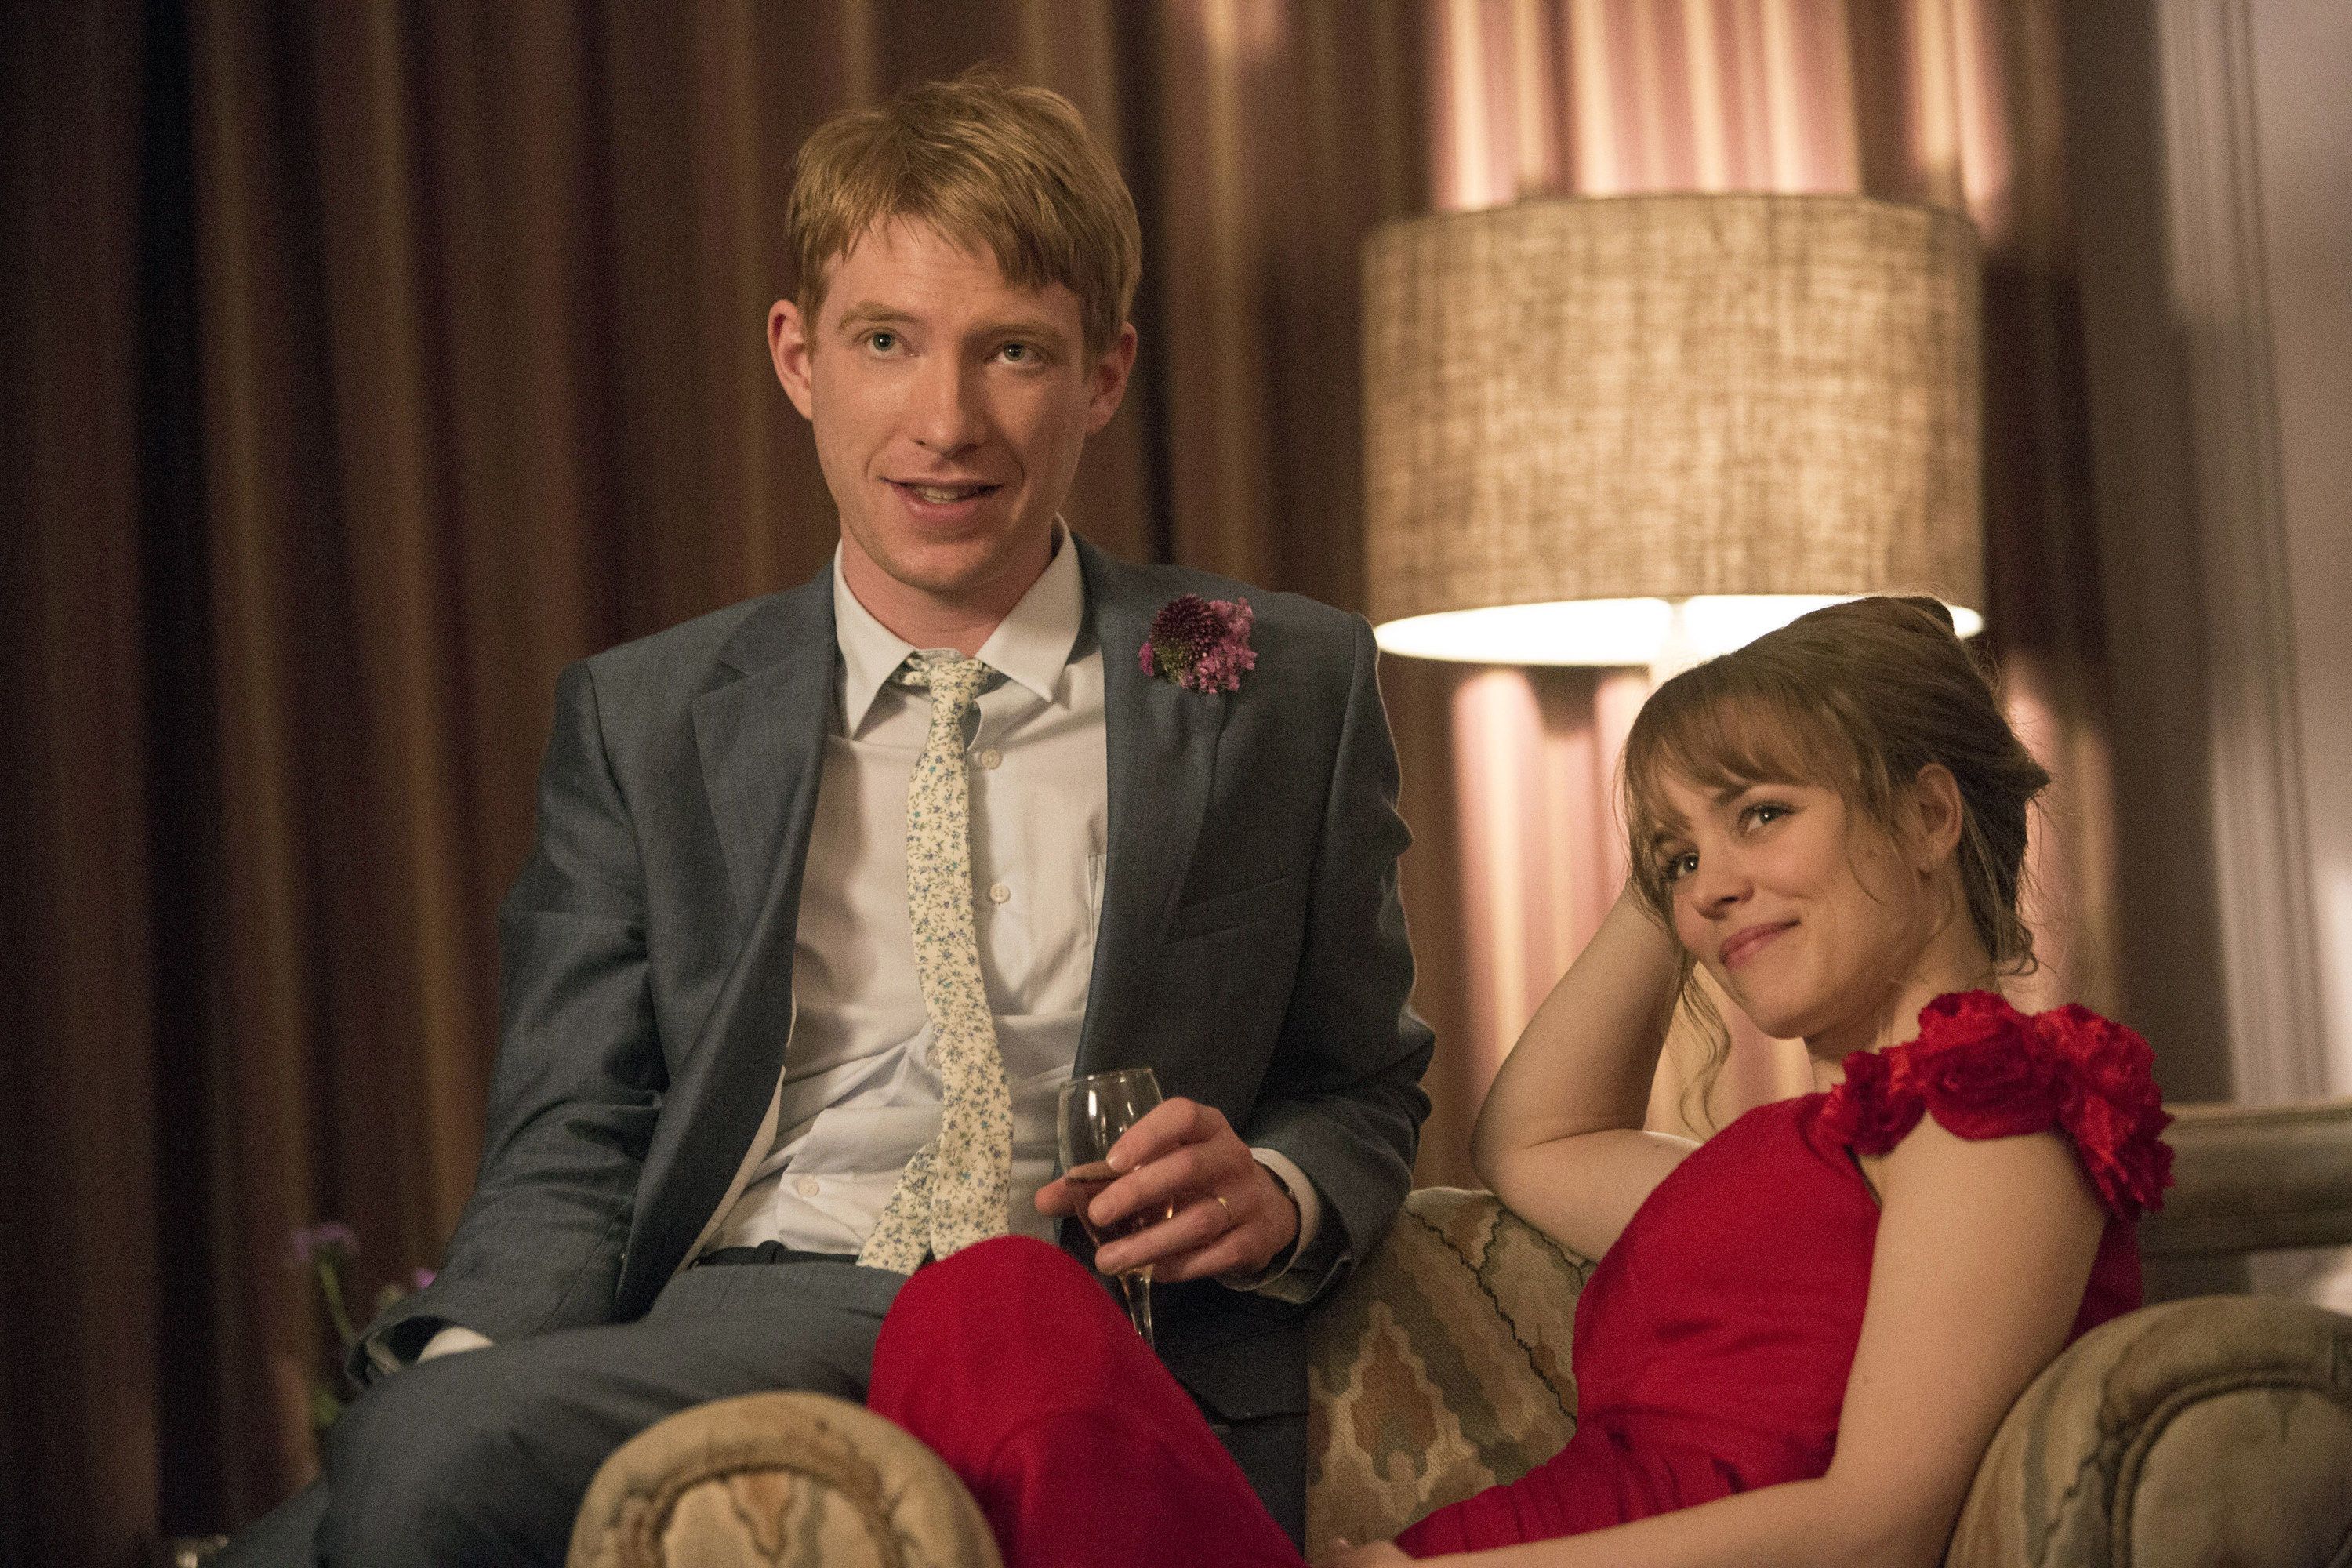 Domnhall Gleeson and Rachel McAdams, wearing a suit and dress, respectively, sit next to each other in a living room in a scene from About Time